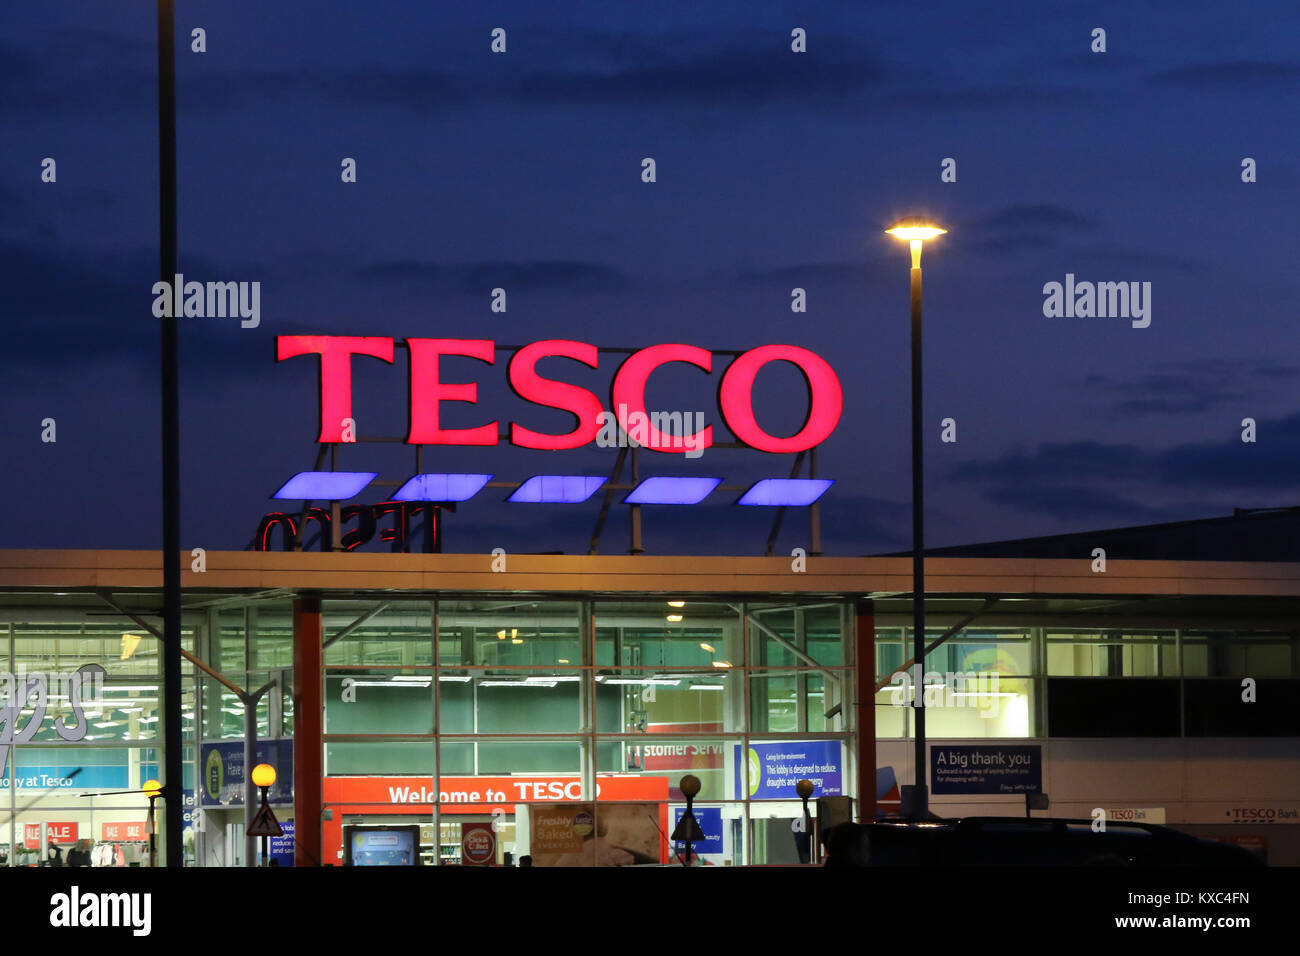 Lights on in Tesco store at night-time with illuminated Tesco sign at Tesco  Supermarket in United Kingdom Stock Photo - Alamy